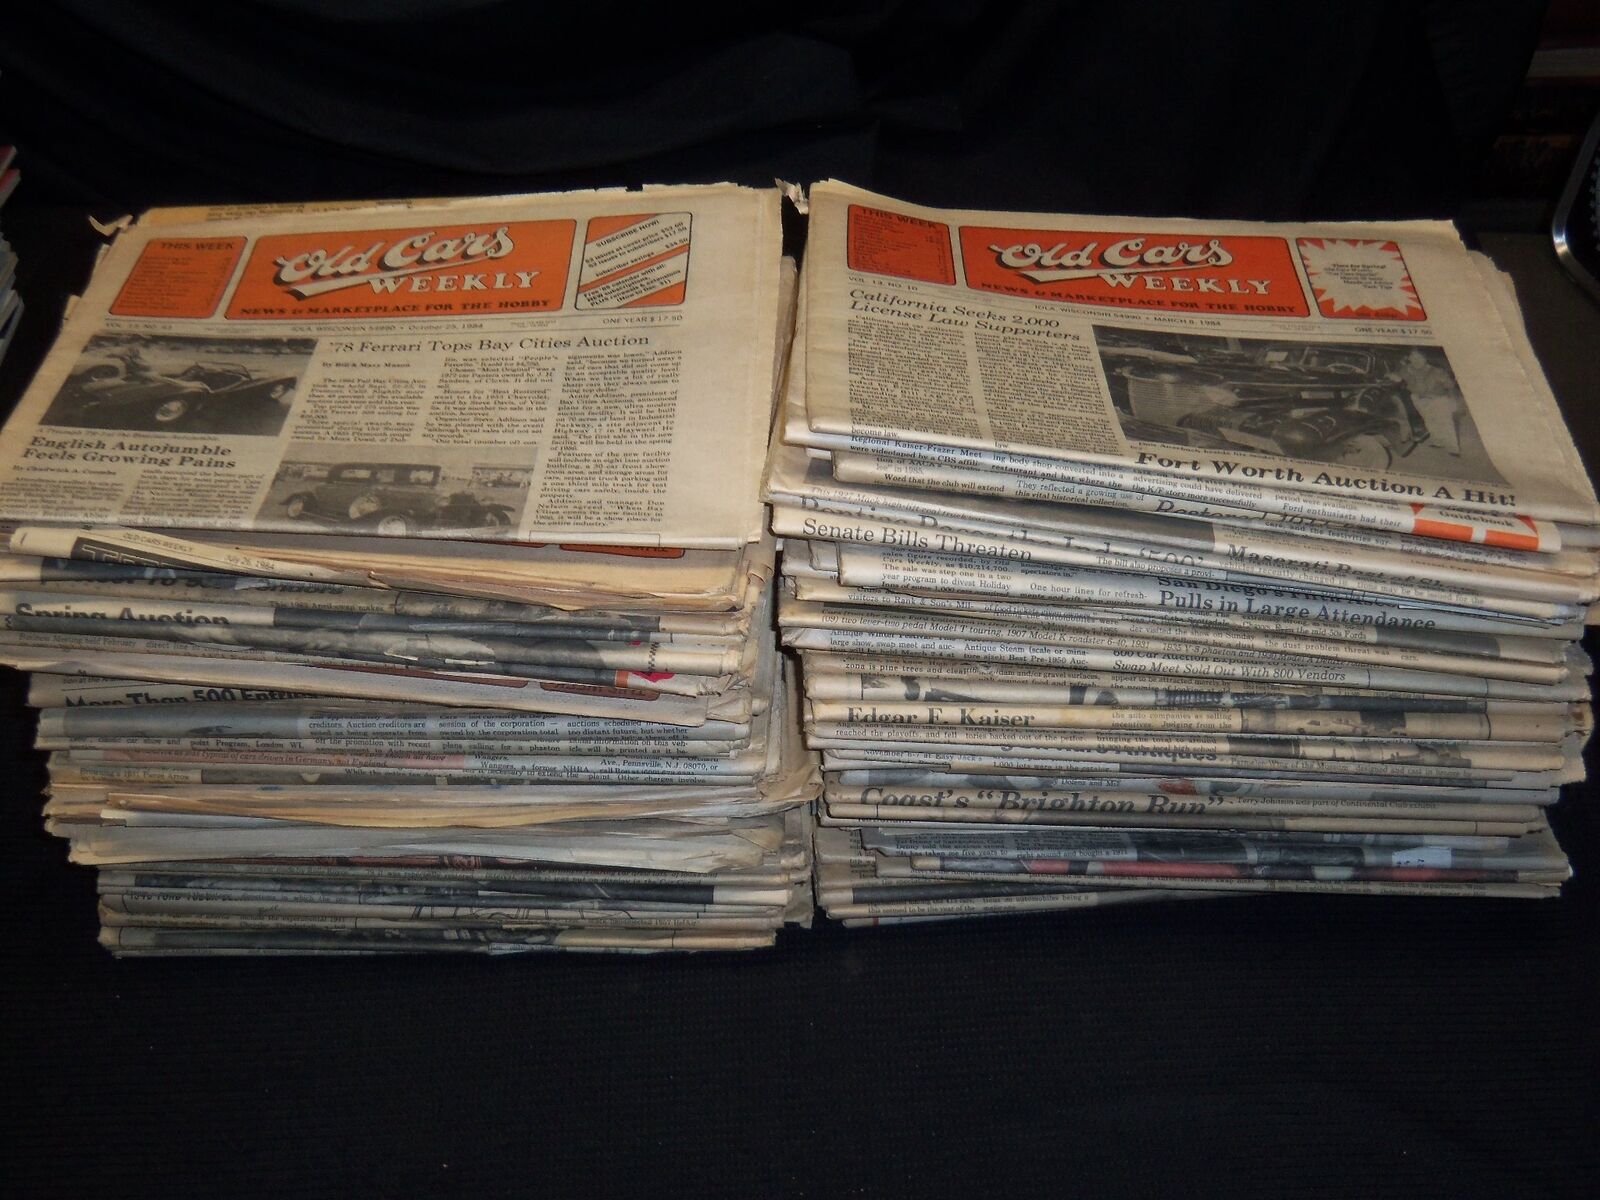 1975-1984 OLD CARS WEEKLY NEWSPAPERS LOT OF 120 ISSUES - GREAT PHOTOS - O 3150